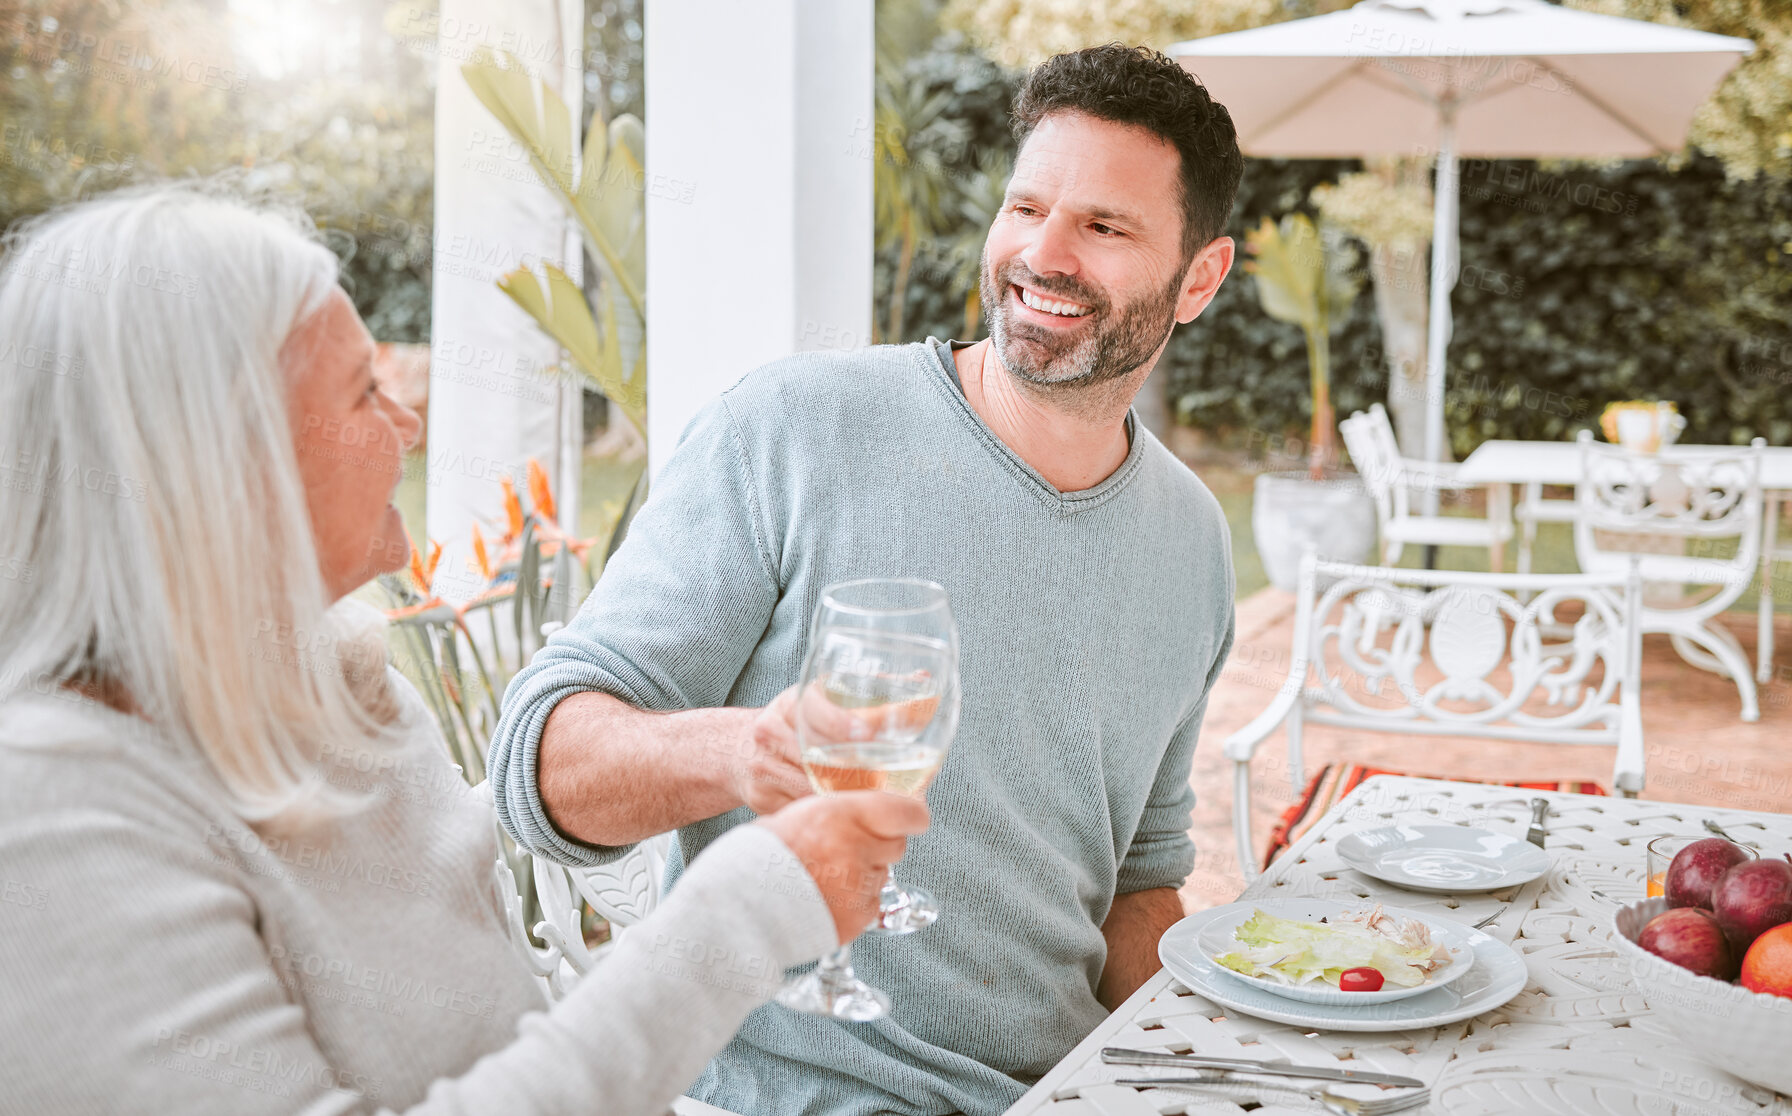 Buy stock photo Shot of a mother and son doing a cheers at lunch outside